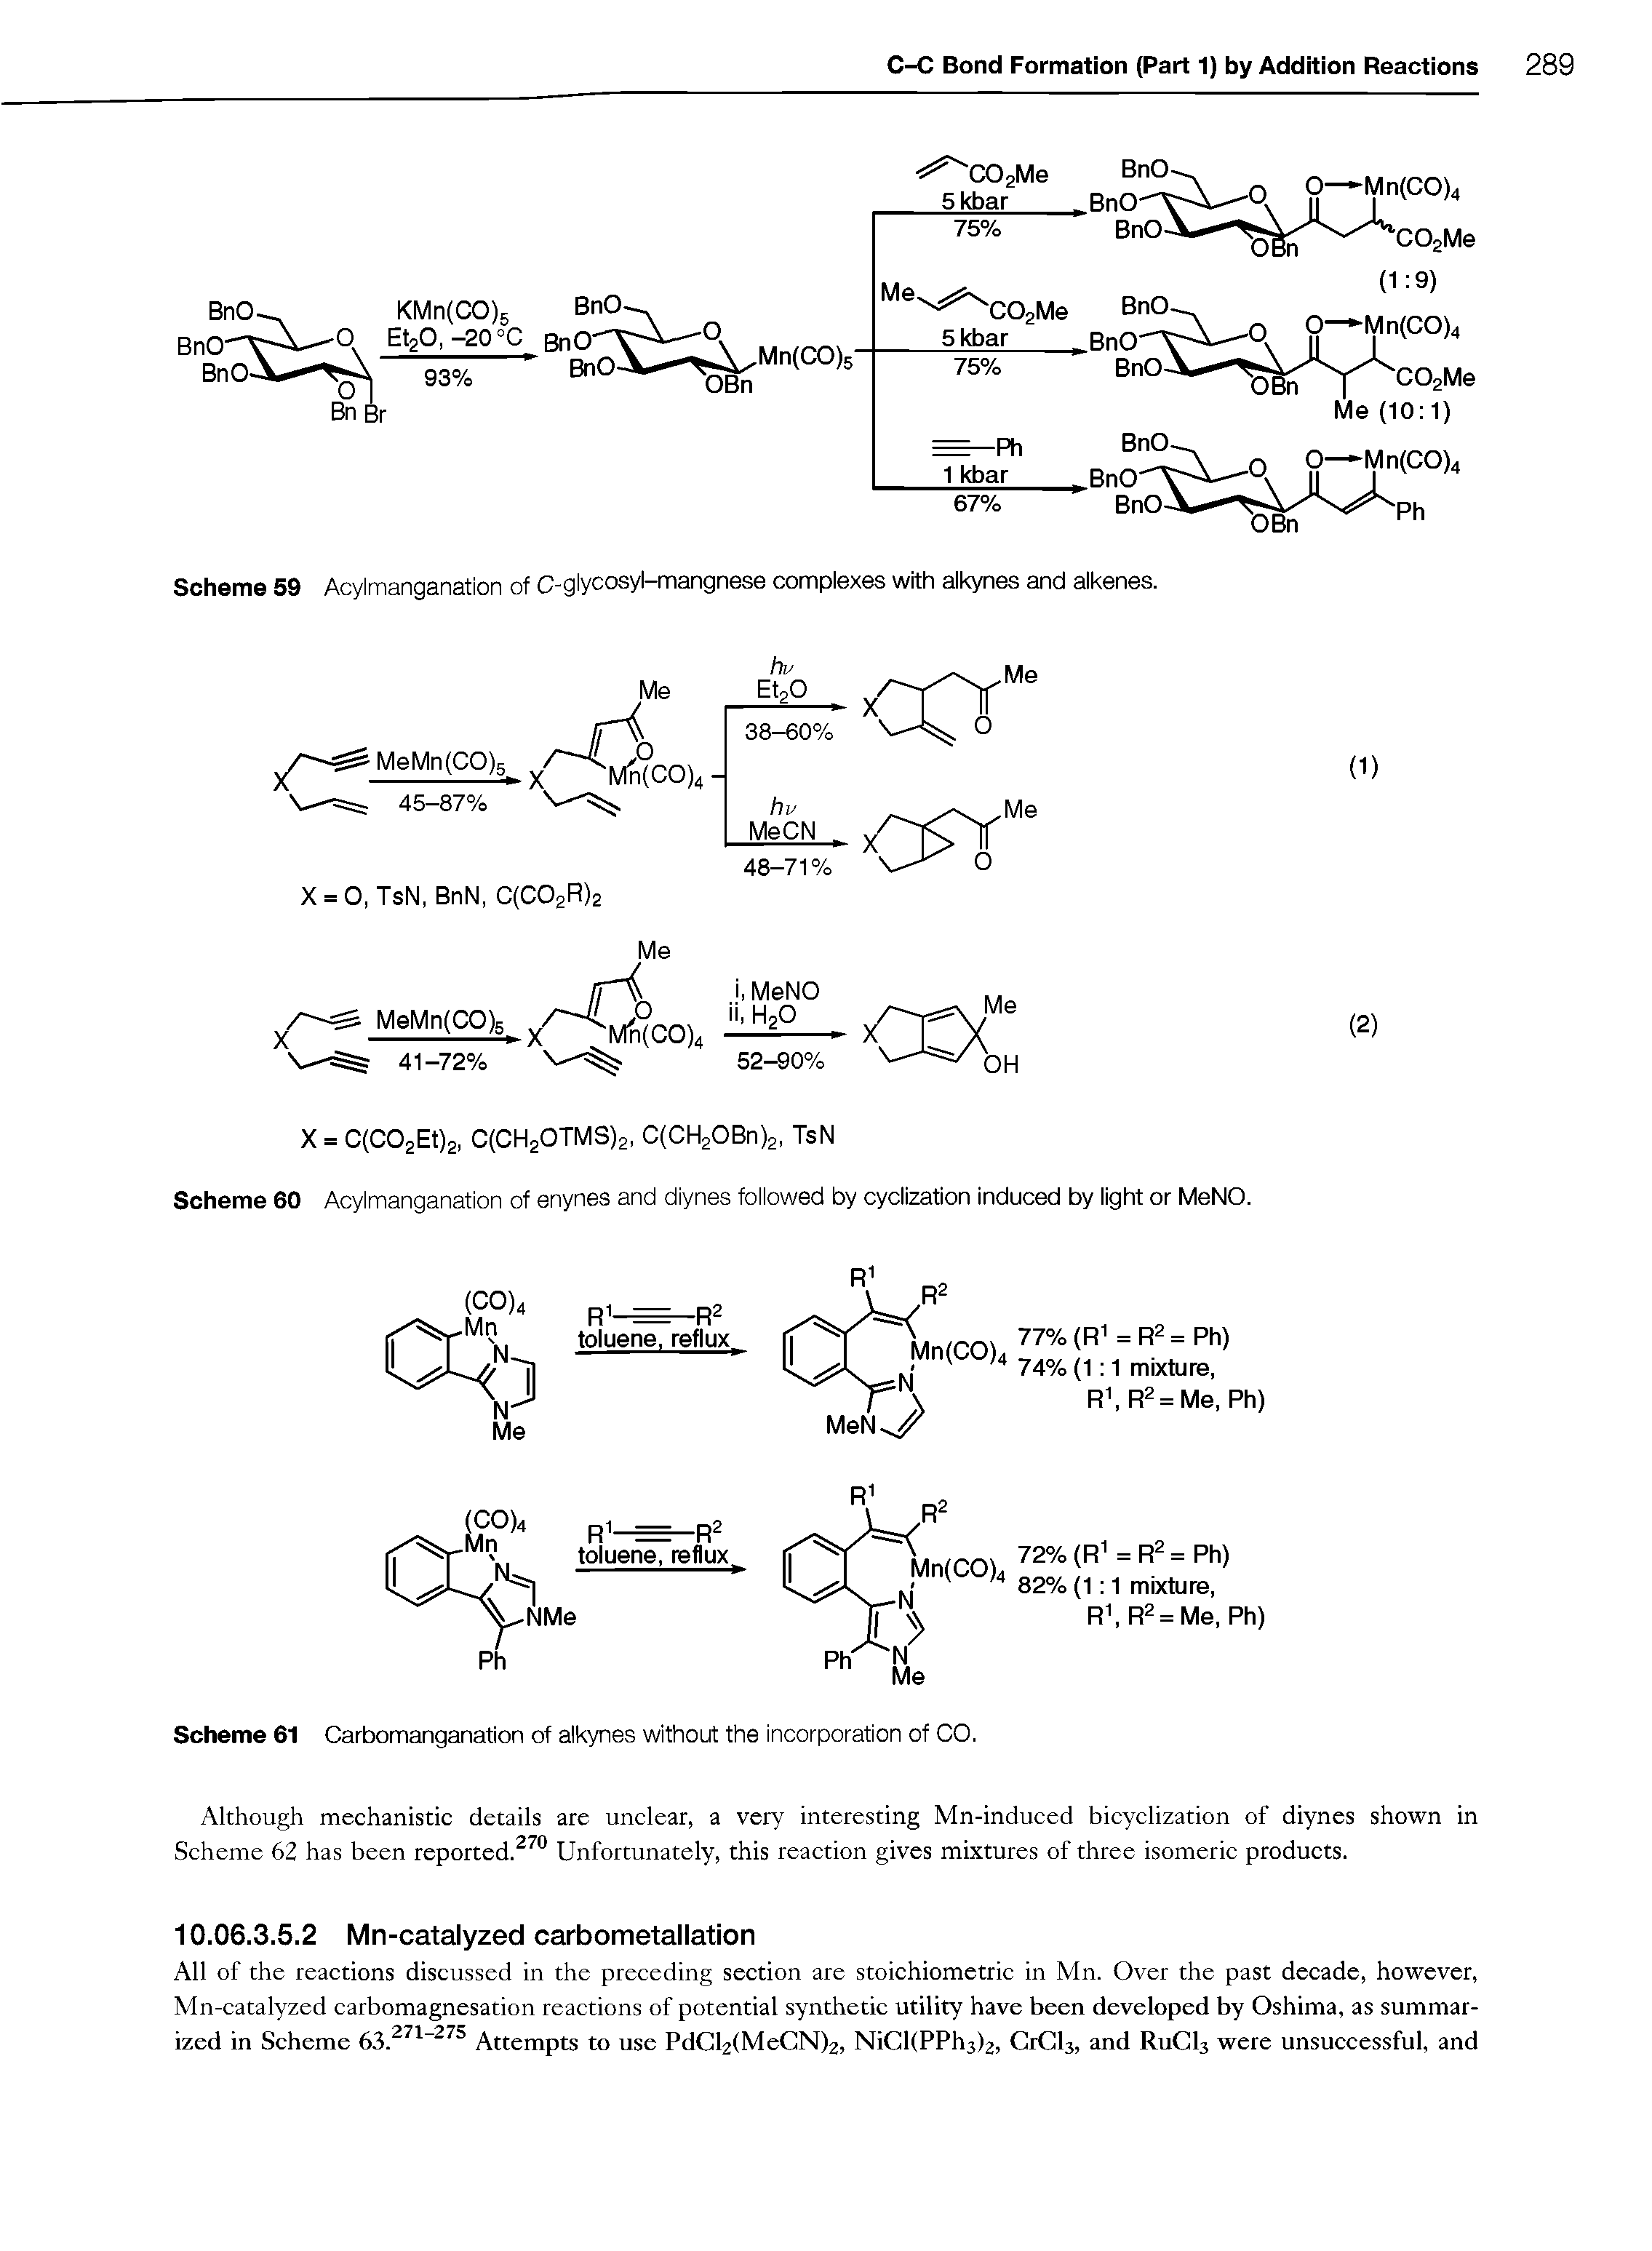 Scheme 59 Acylmanganation of C-glycosyl-mangnese complexes with alkynes and alkenes.